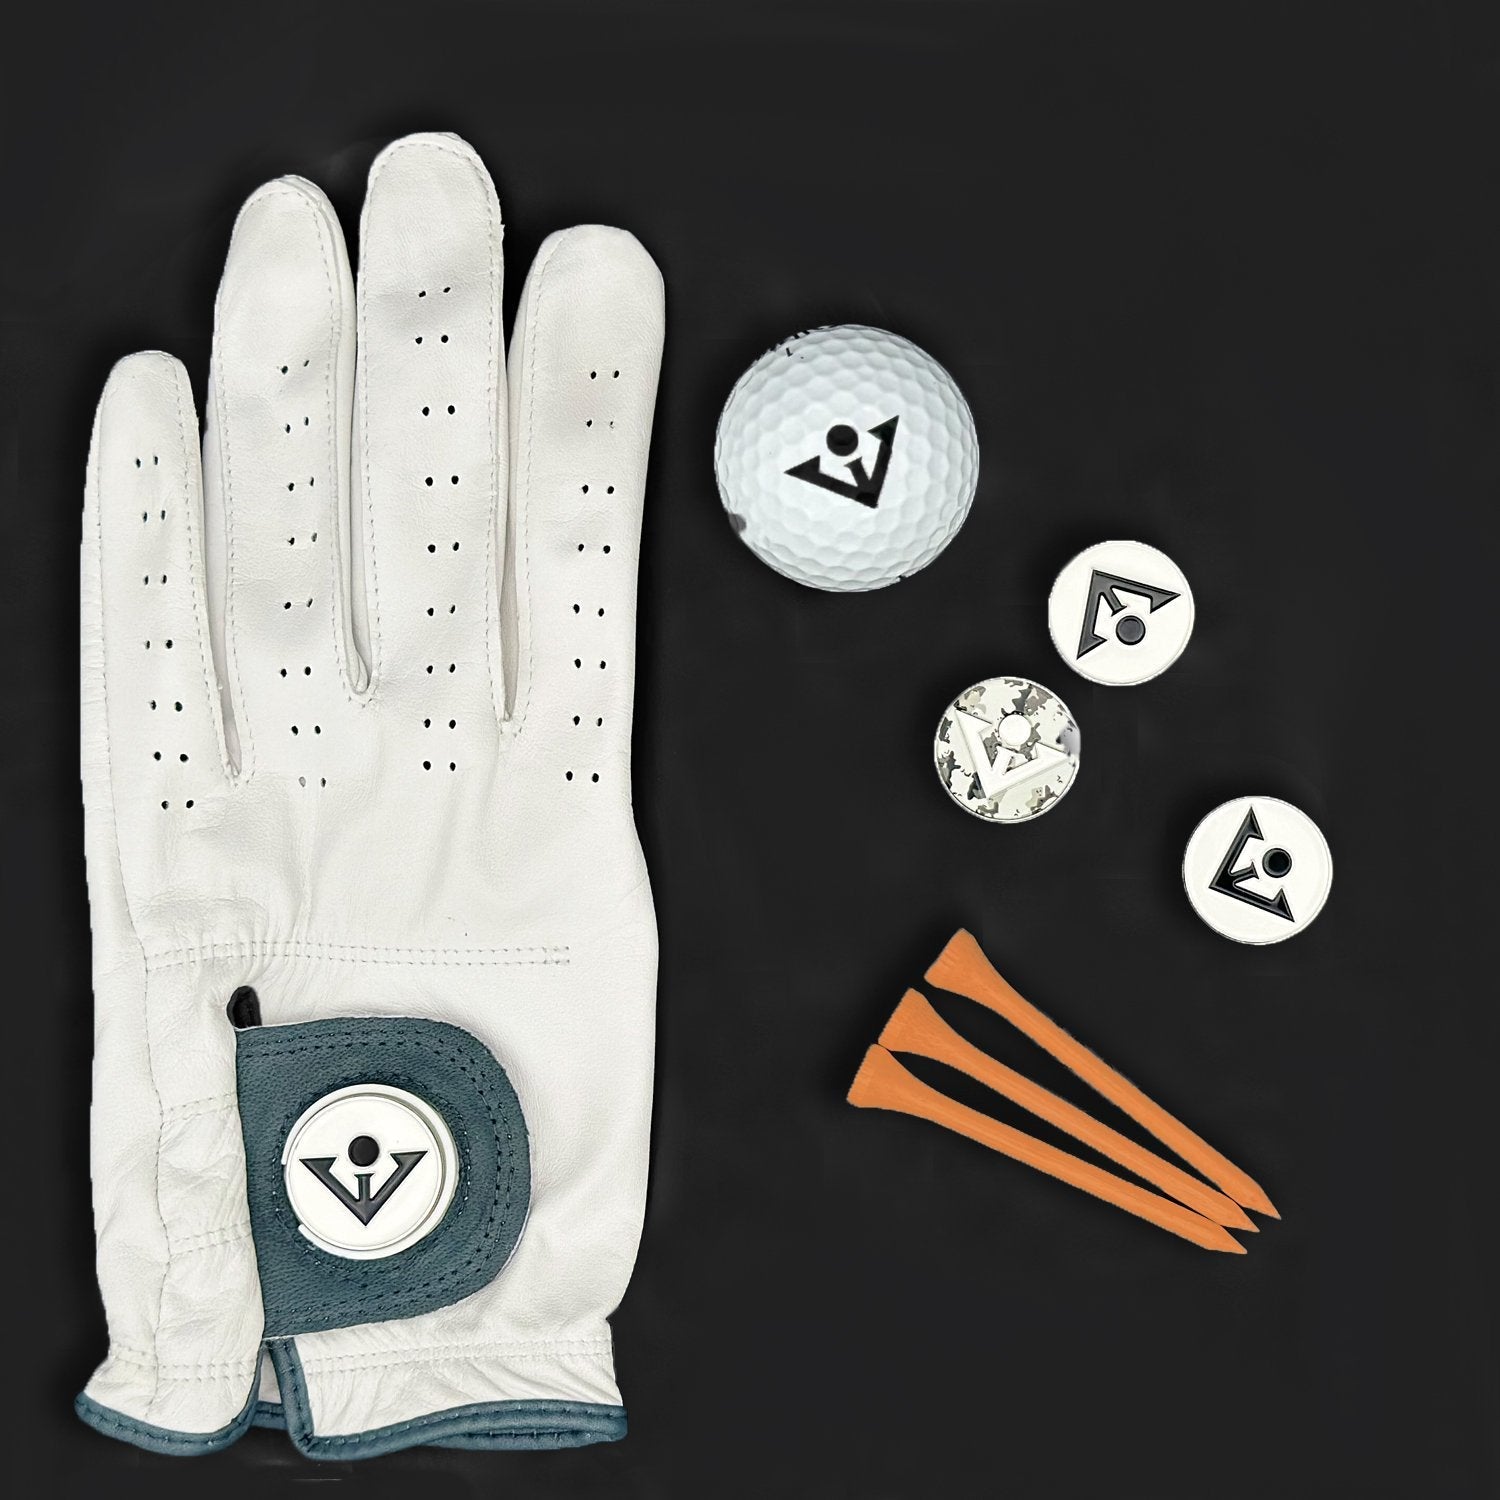 Women's Grey and white leather golf glove next to a ball and ball markers with the VivanTee logo, and tees.